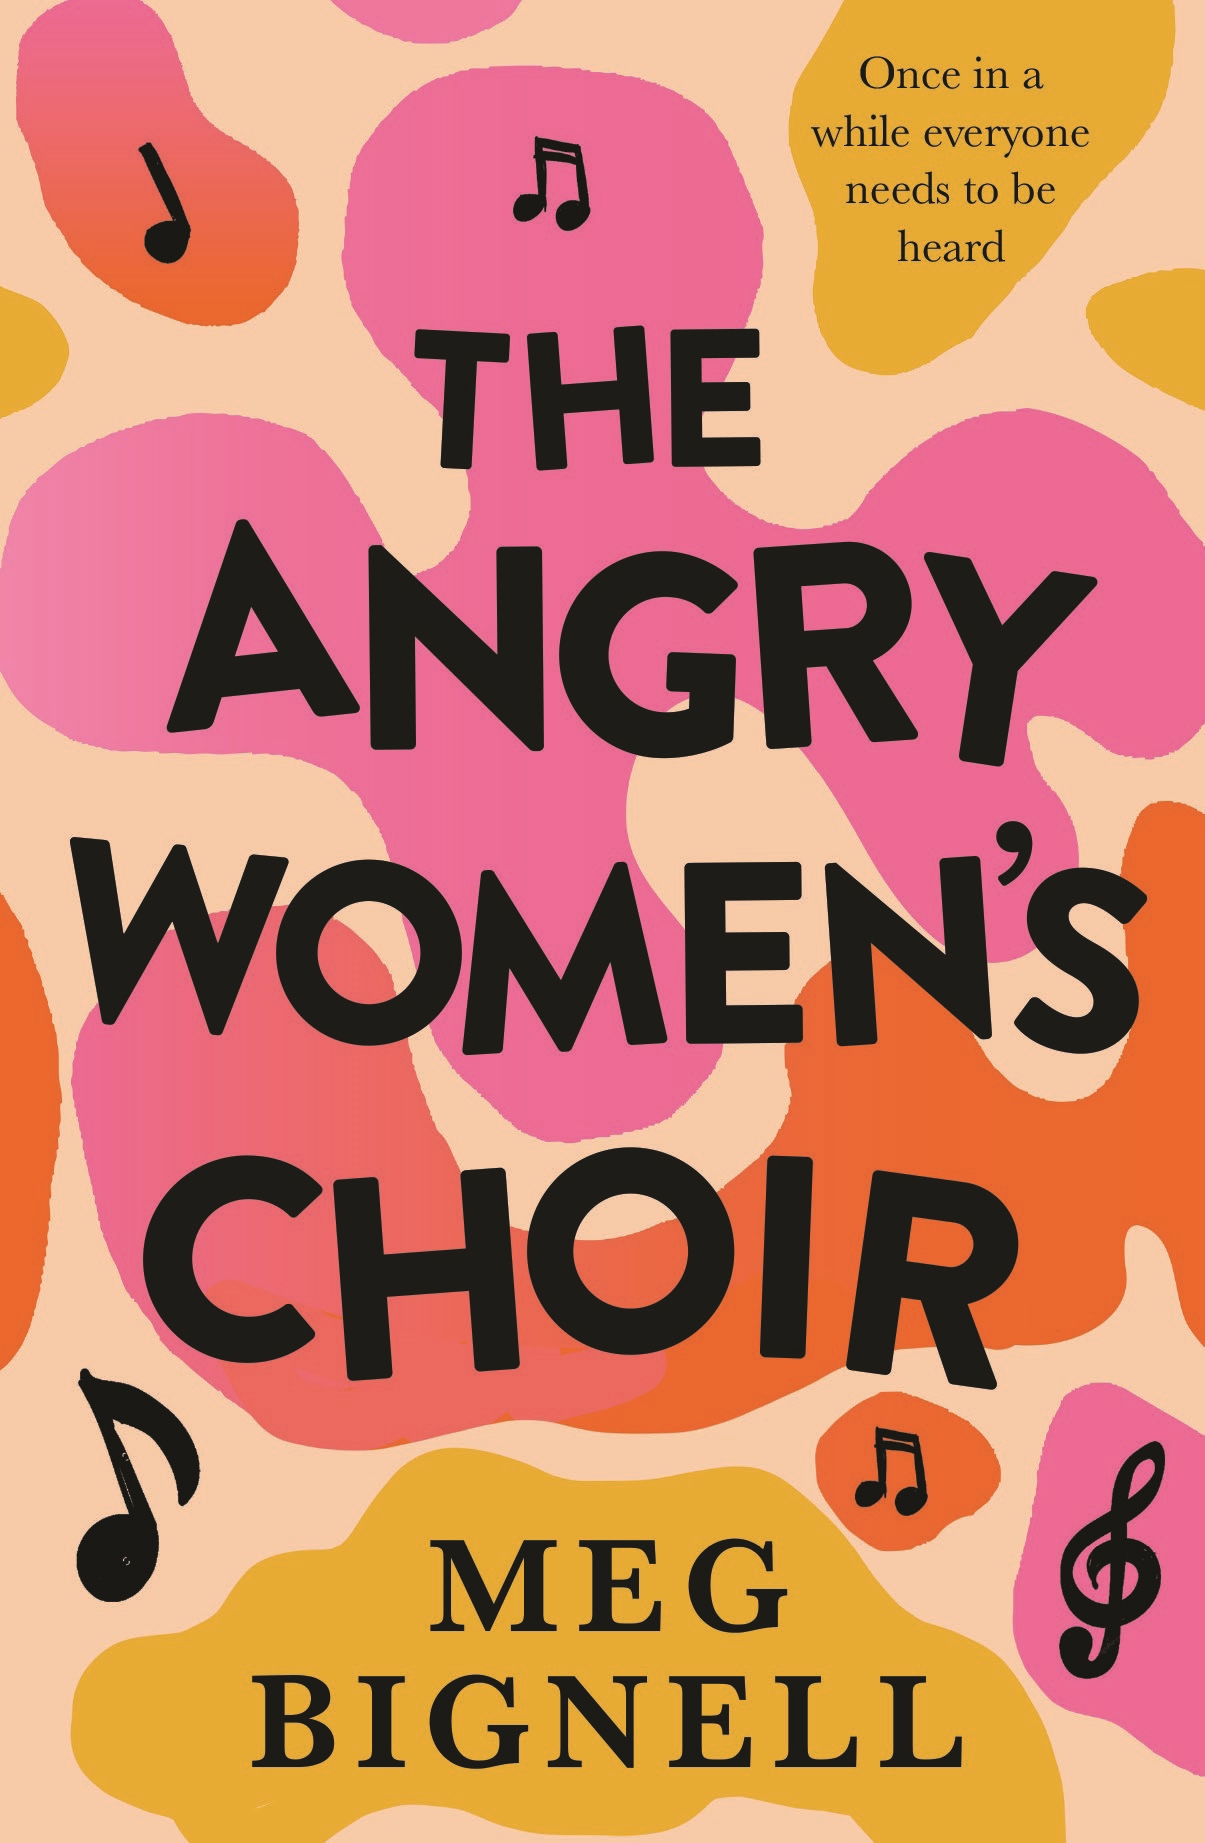 The Angry Women’s Choir by Meg Bignell